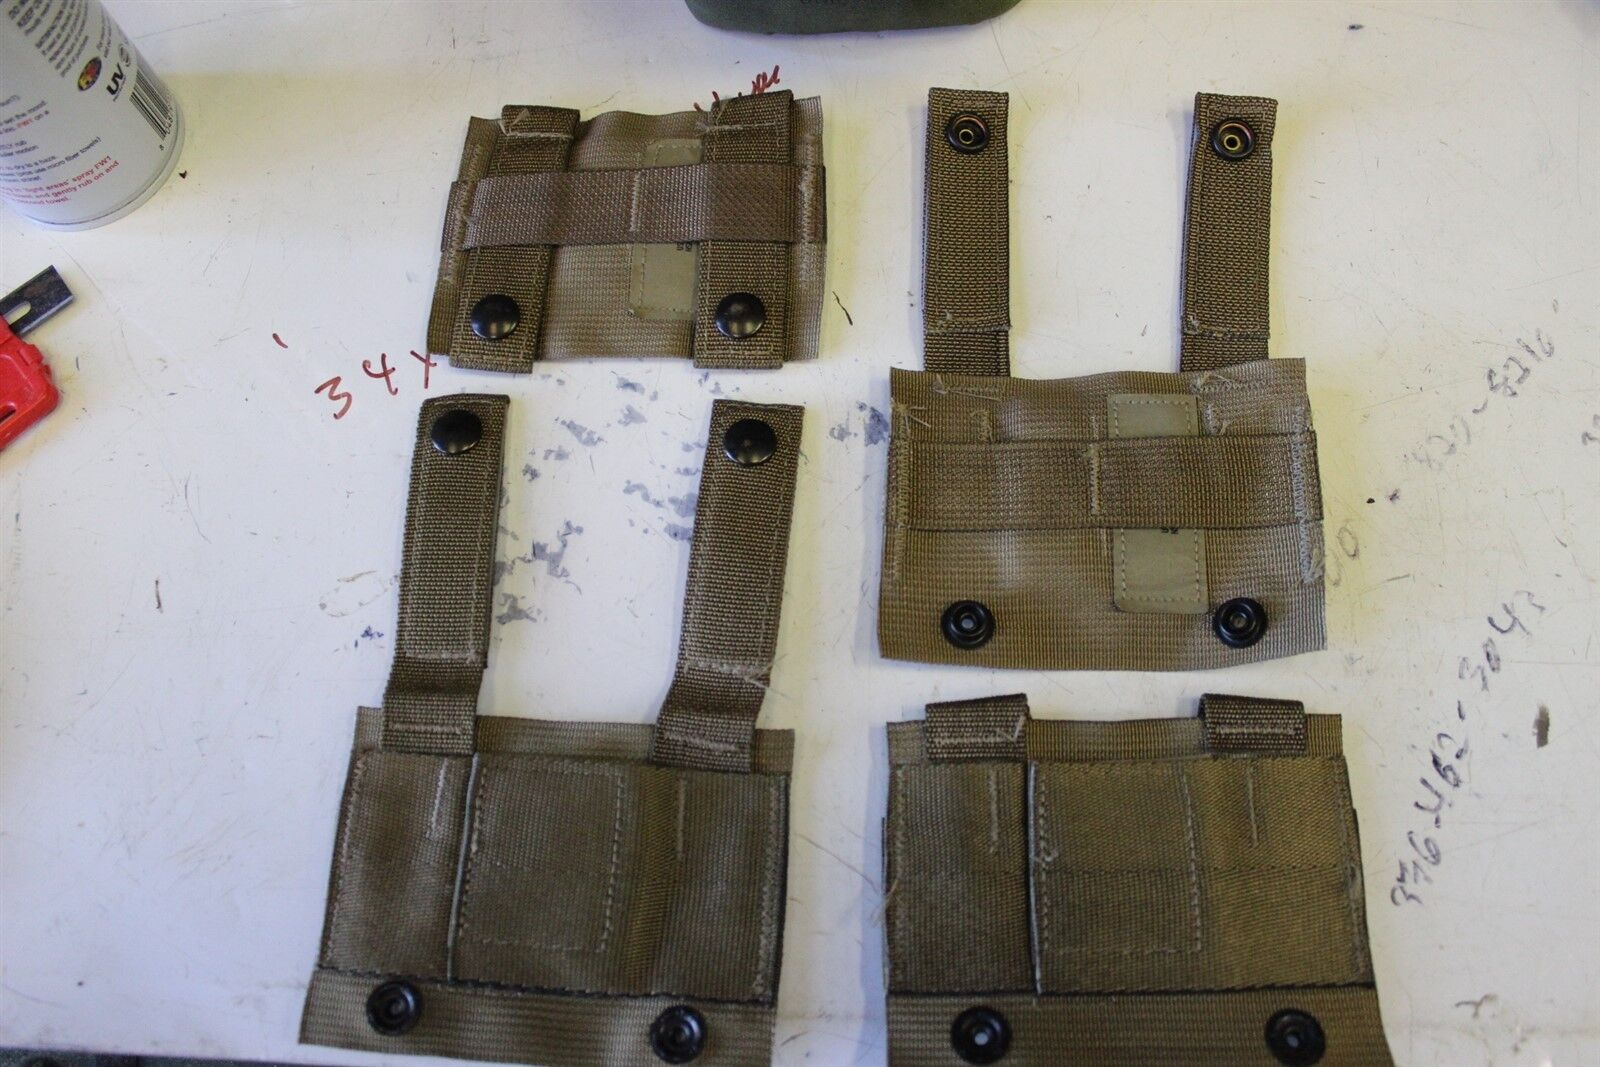 4 COYOTE BROWN ALICE CLIP TO MOLLE II ADAPTERS $11.89 Cost NOW $3.99 & SHIPPING 